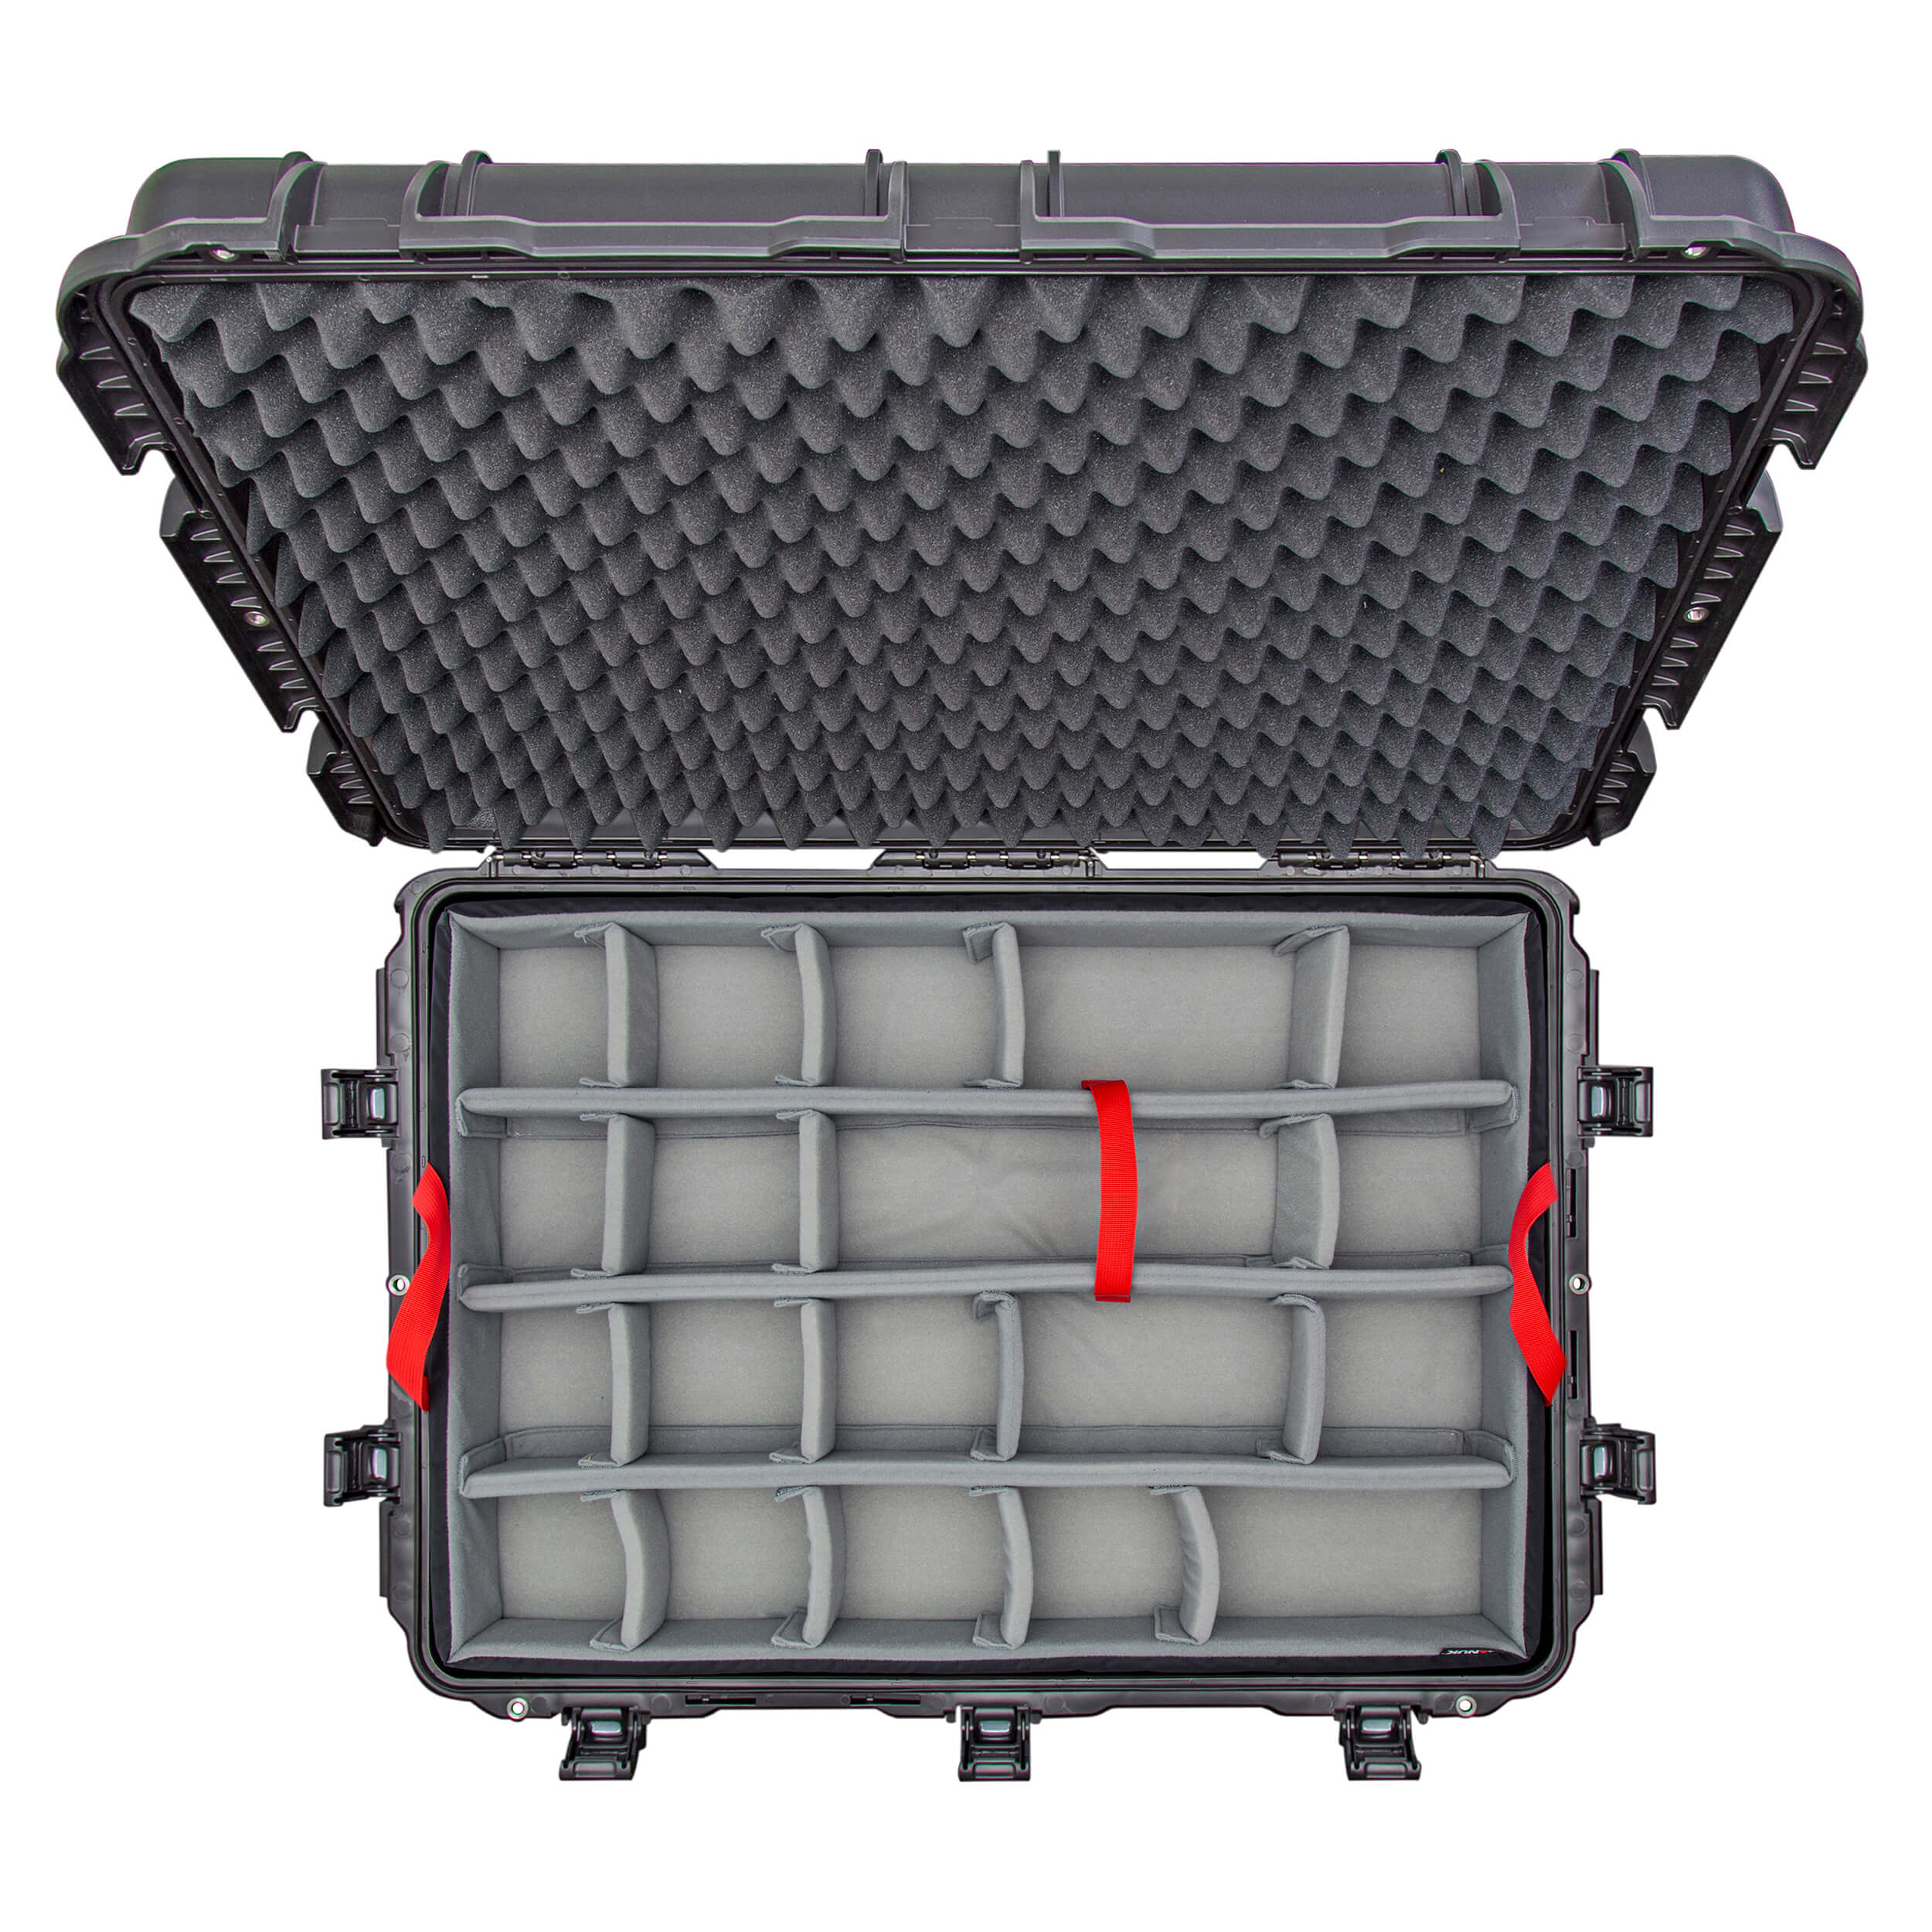 NANUK 975T with Padded Dividers Top Tray